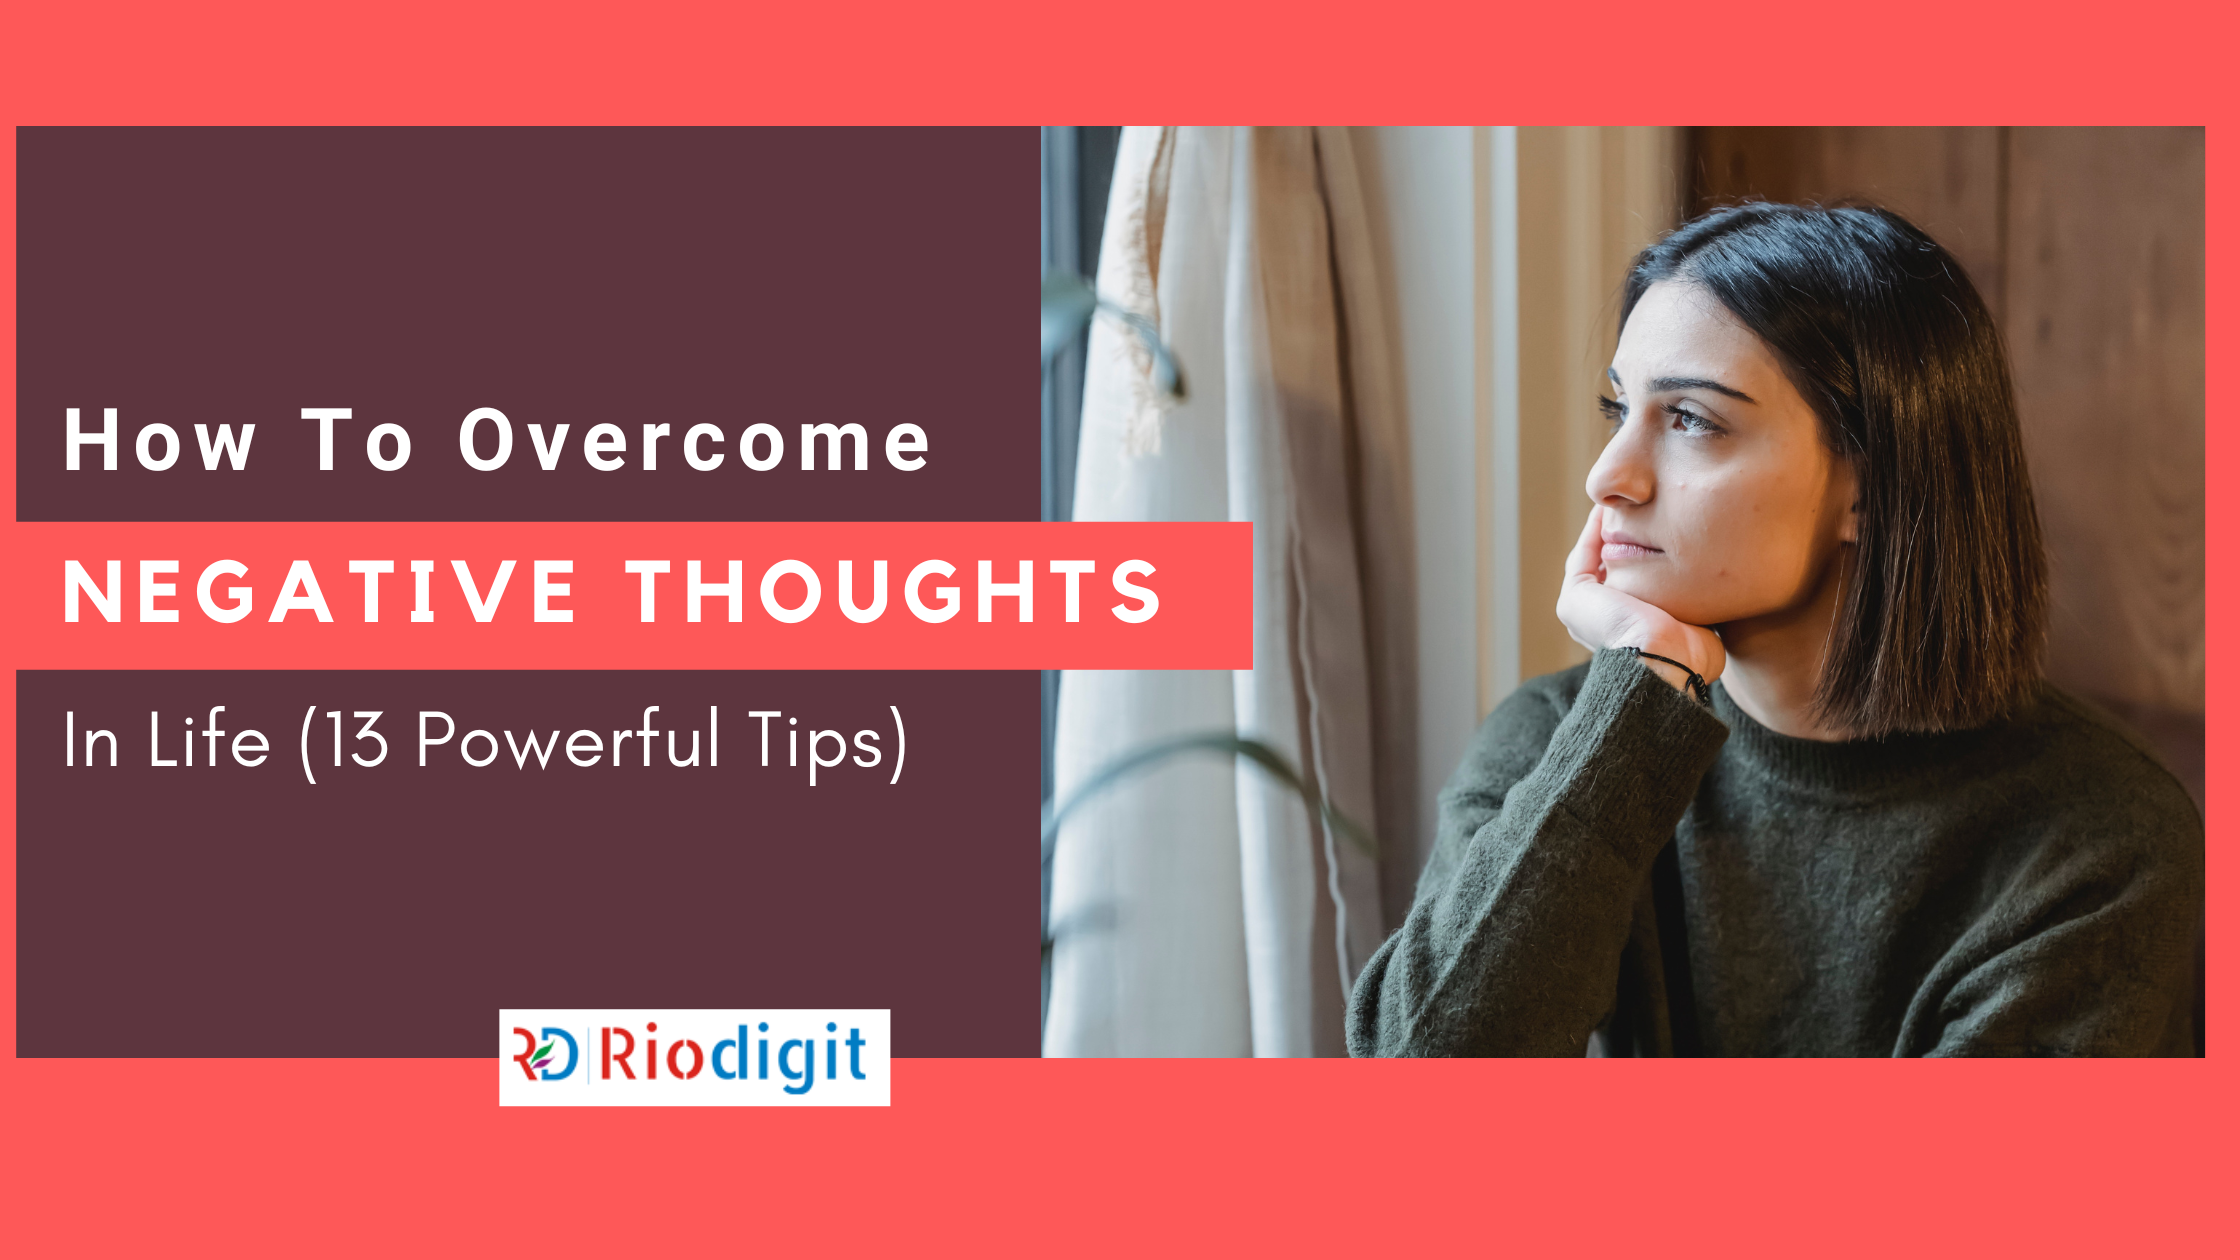 How to Overcome Negative Thoughts